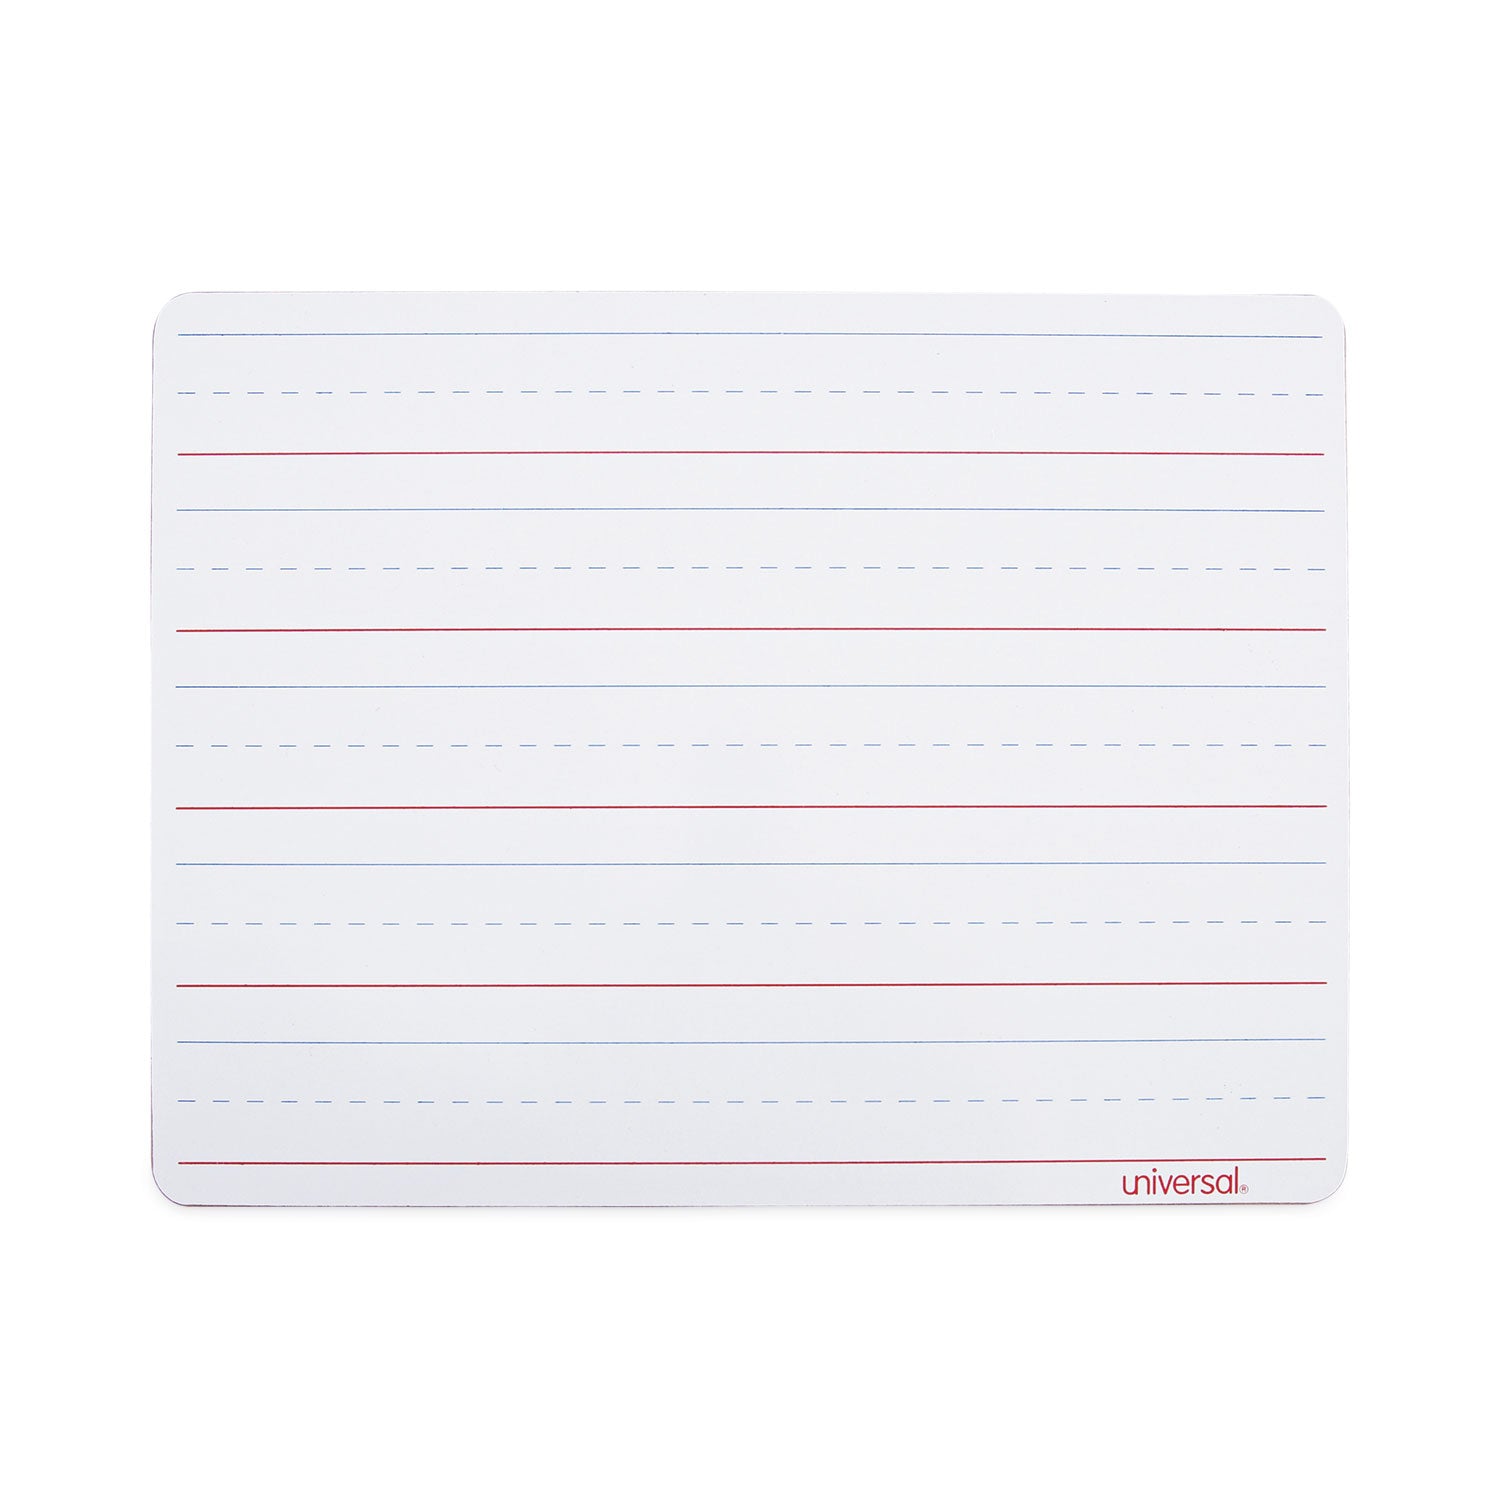 lap-learning-dry-erase-board-penmanship-ruled-1175-x-875-white-surface-6-pack_unv43911 - 1